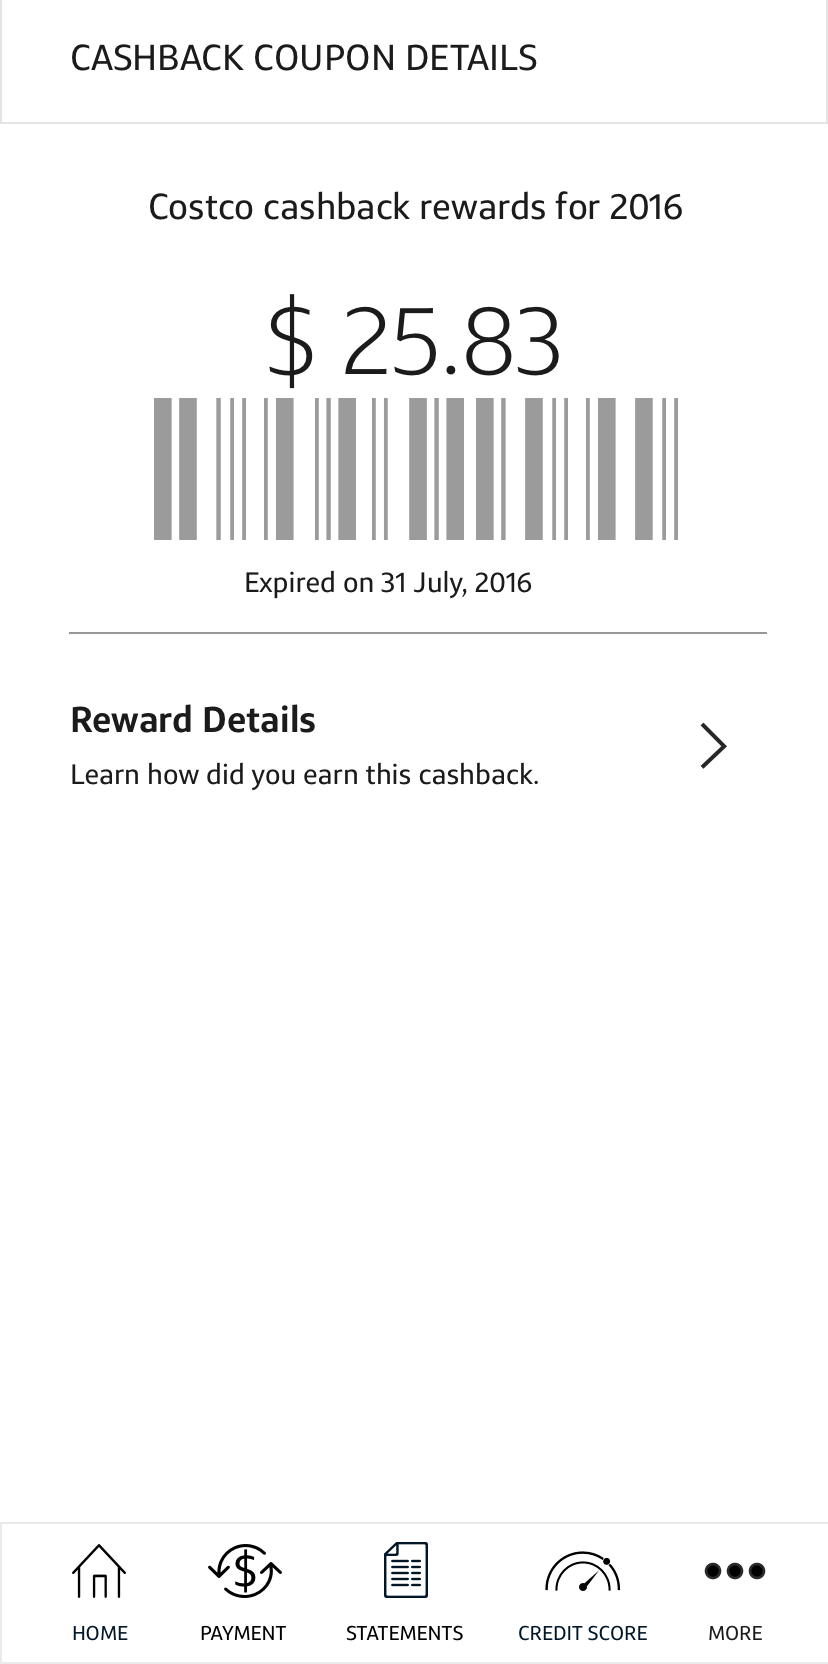 Coupon Details – Expired